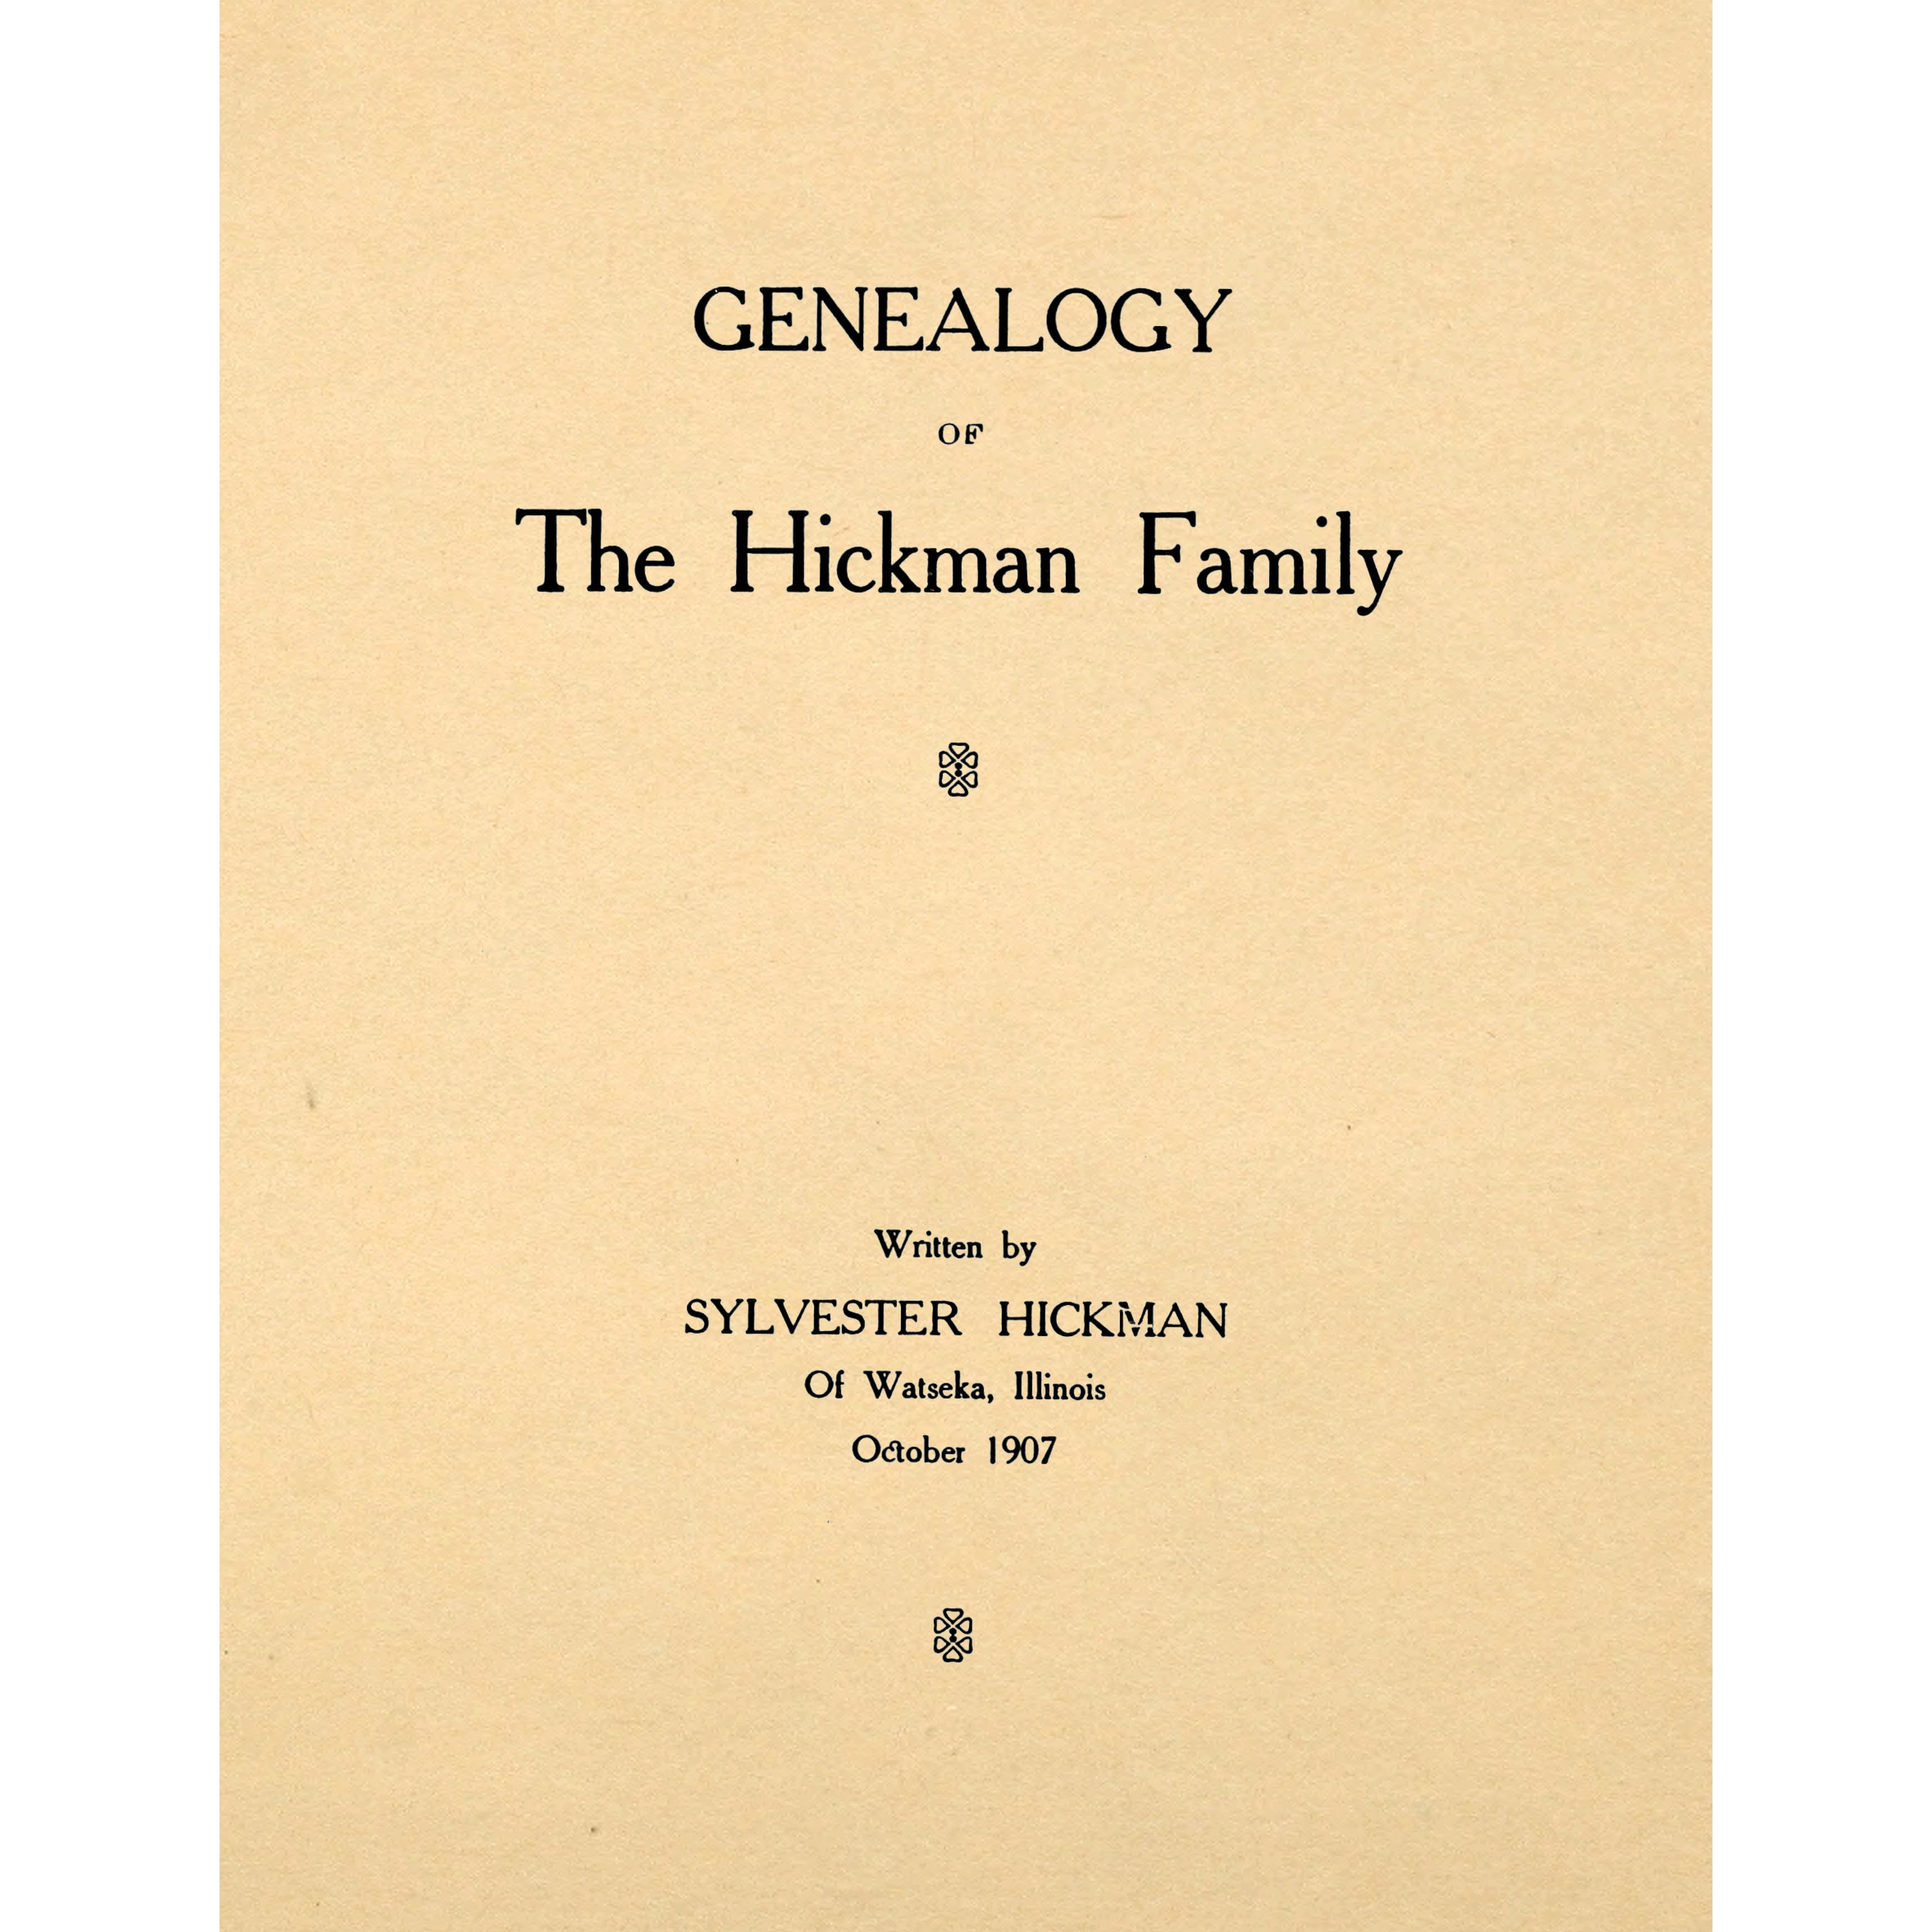 Genealogy of the Hickman Family